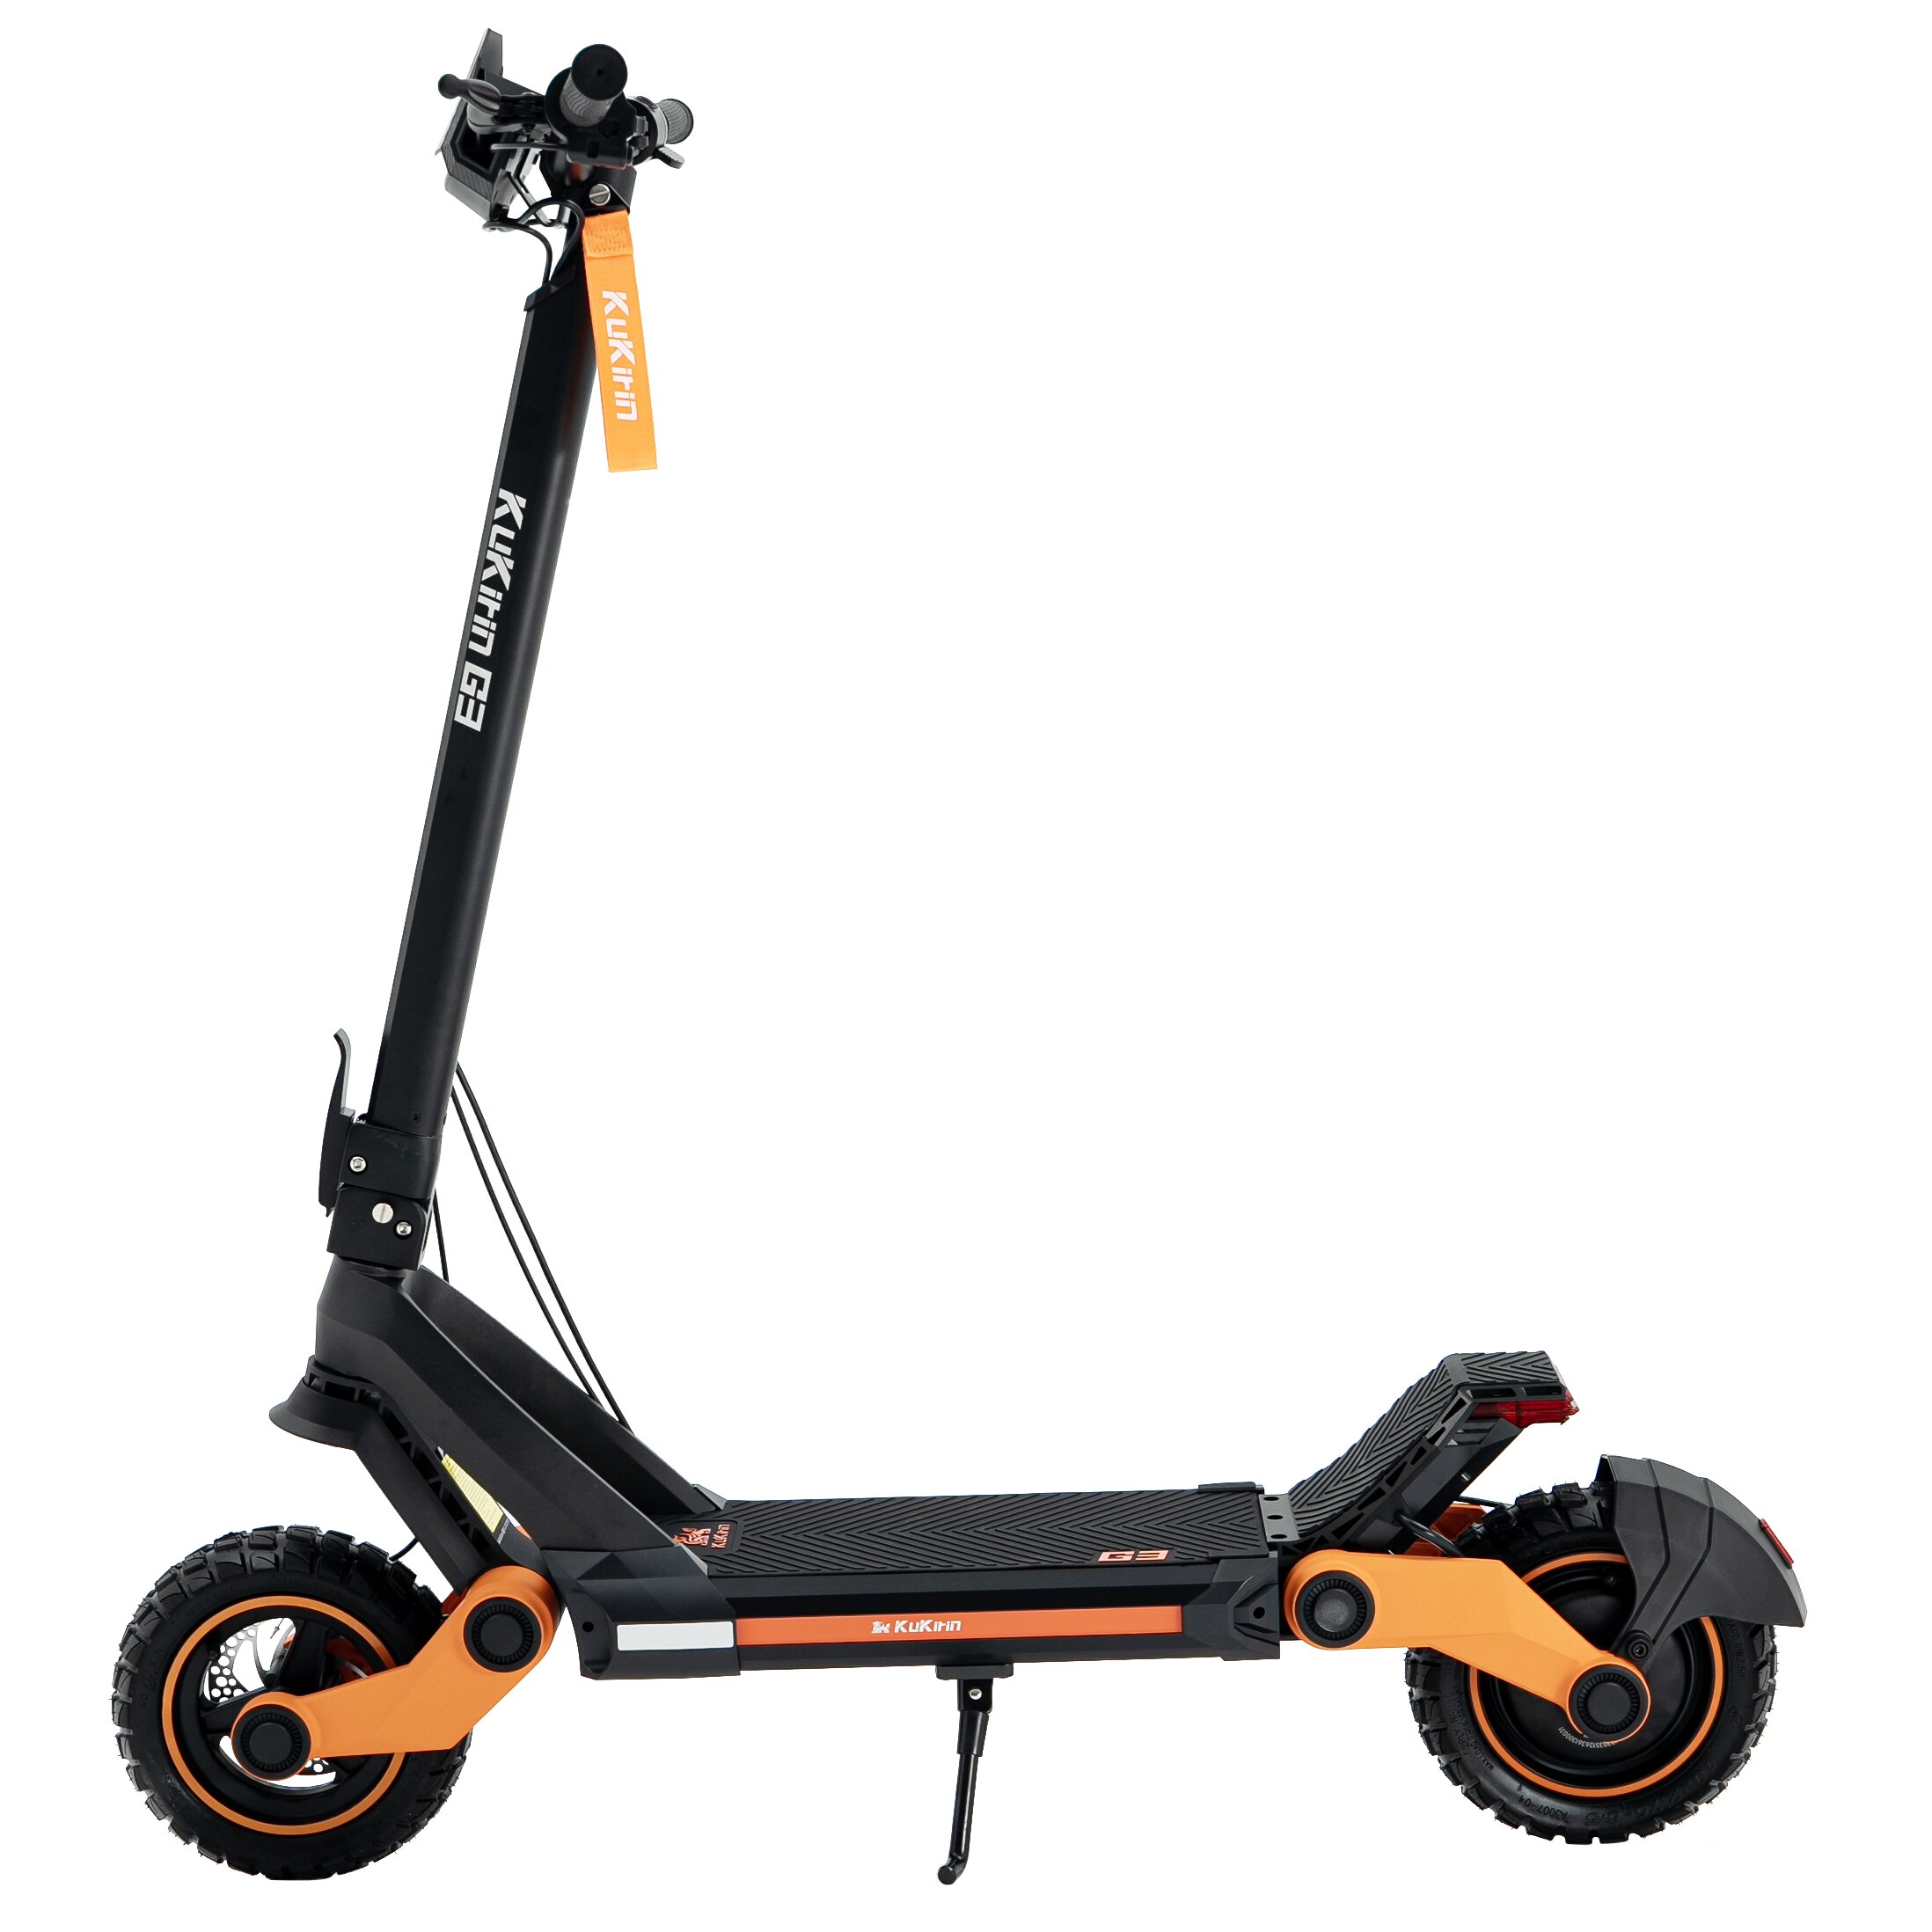 best price,kukirin,g3,18ah,52v,1200w,10.5in,electric,scooter,eu,coupon,price,discount